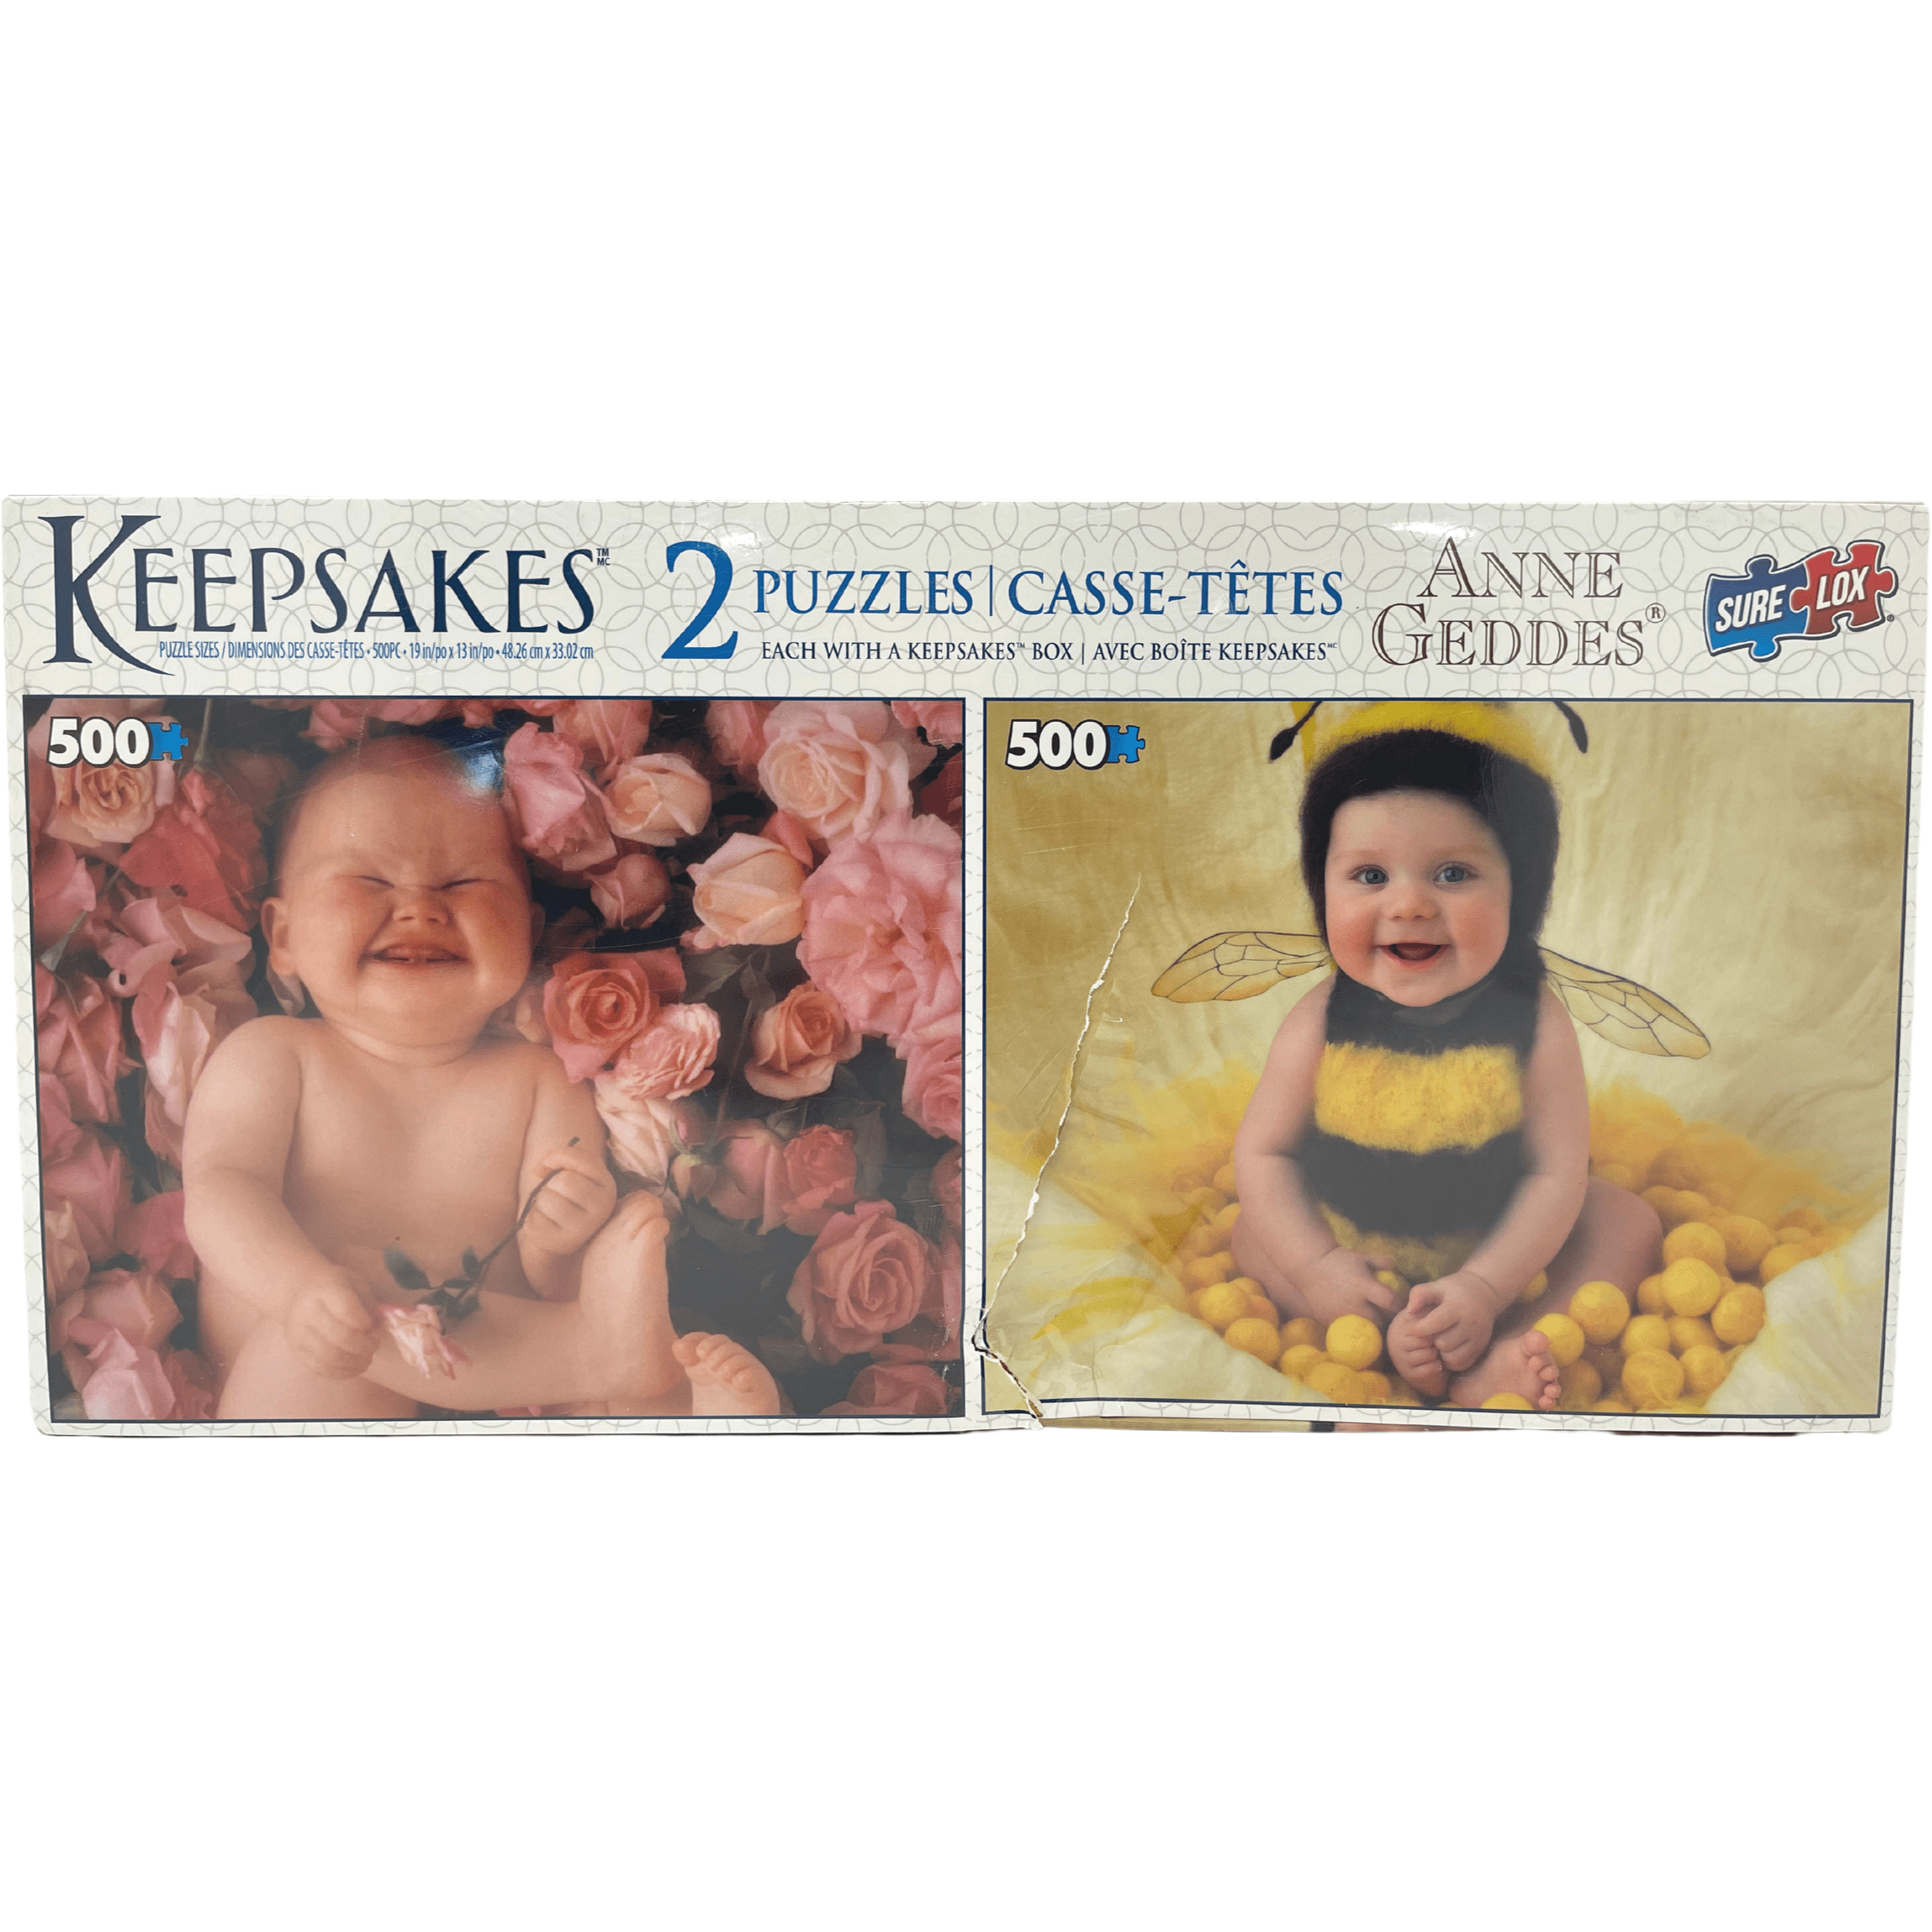 Keepsakes Set of 2 Puzzles / Anne Geddes Baby Puzzles / 500 Pieces Each / Tabletop Puzzles **DEALS**